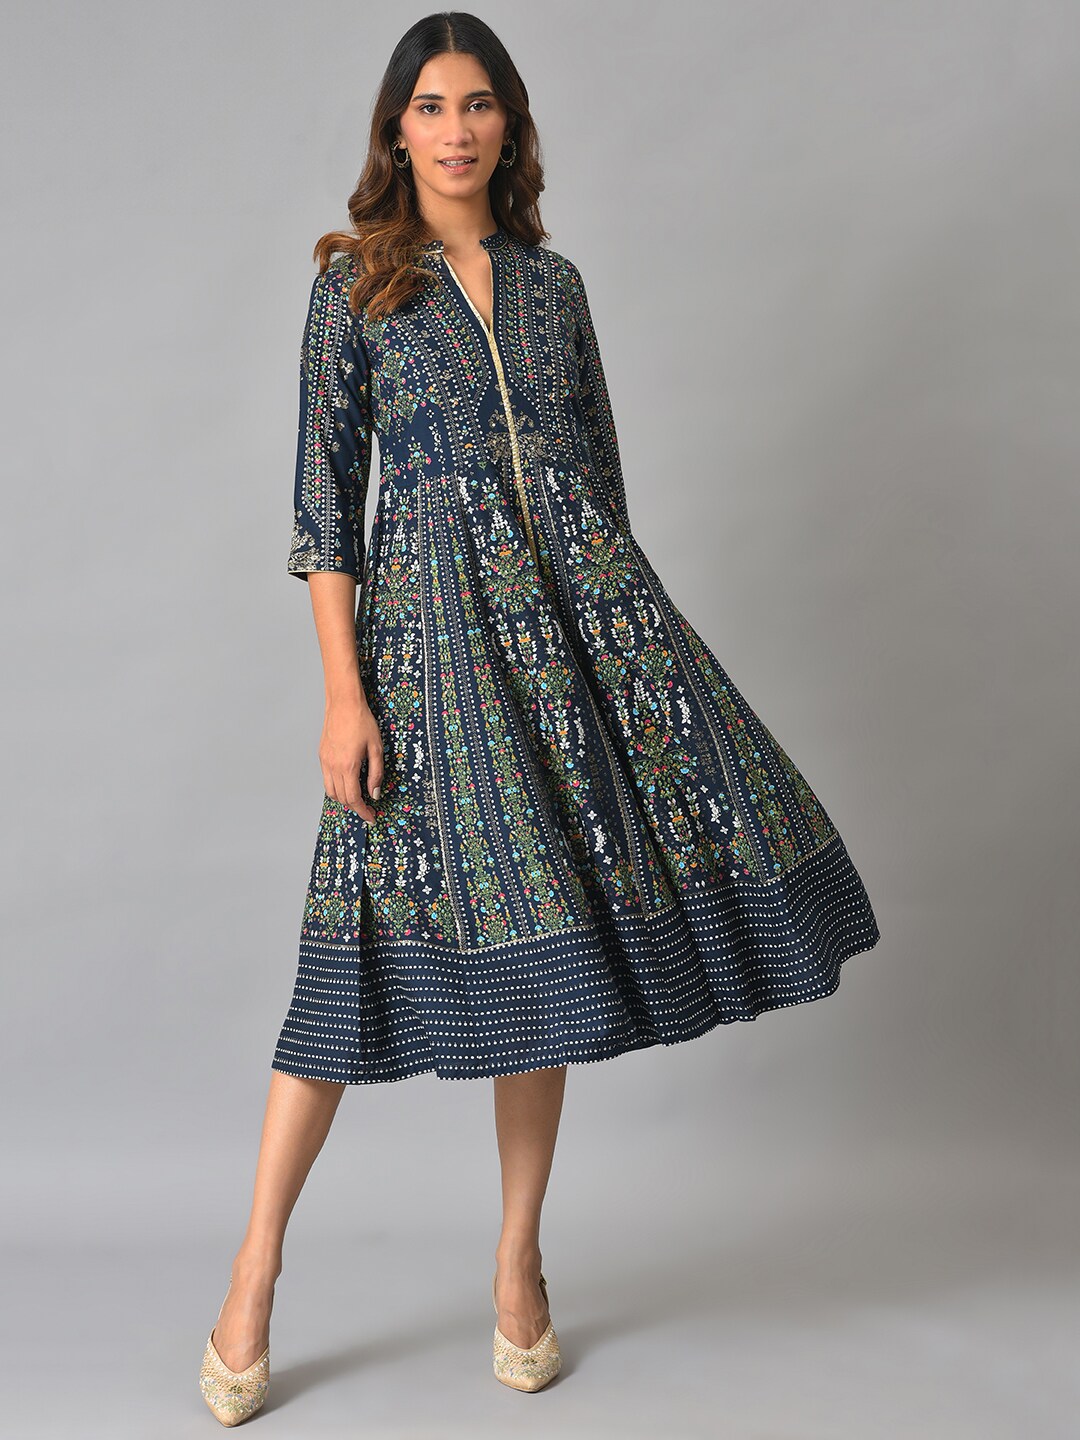 W Blue Ethnic Motifs Ethnic A-Line Dress Price in India